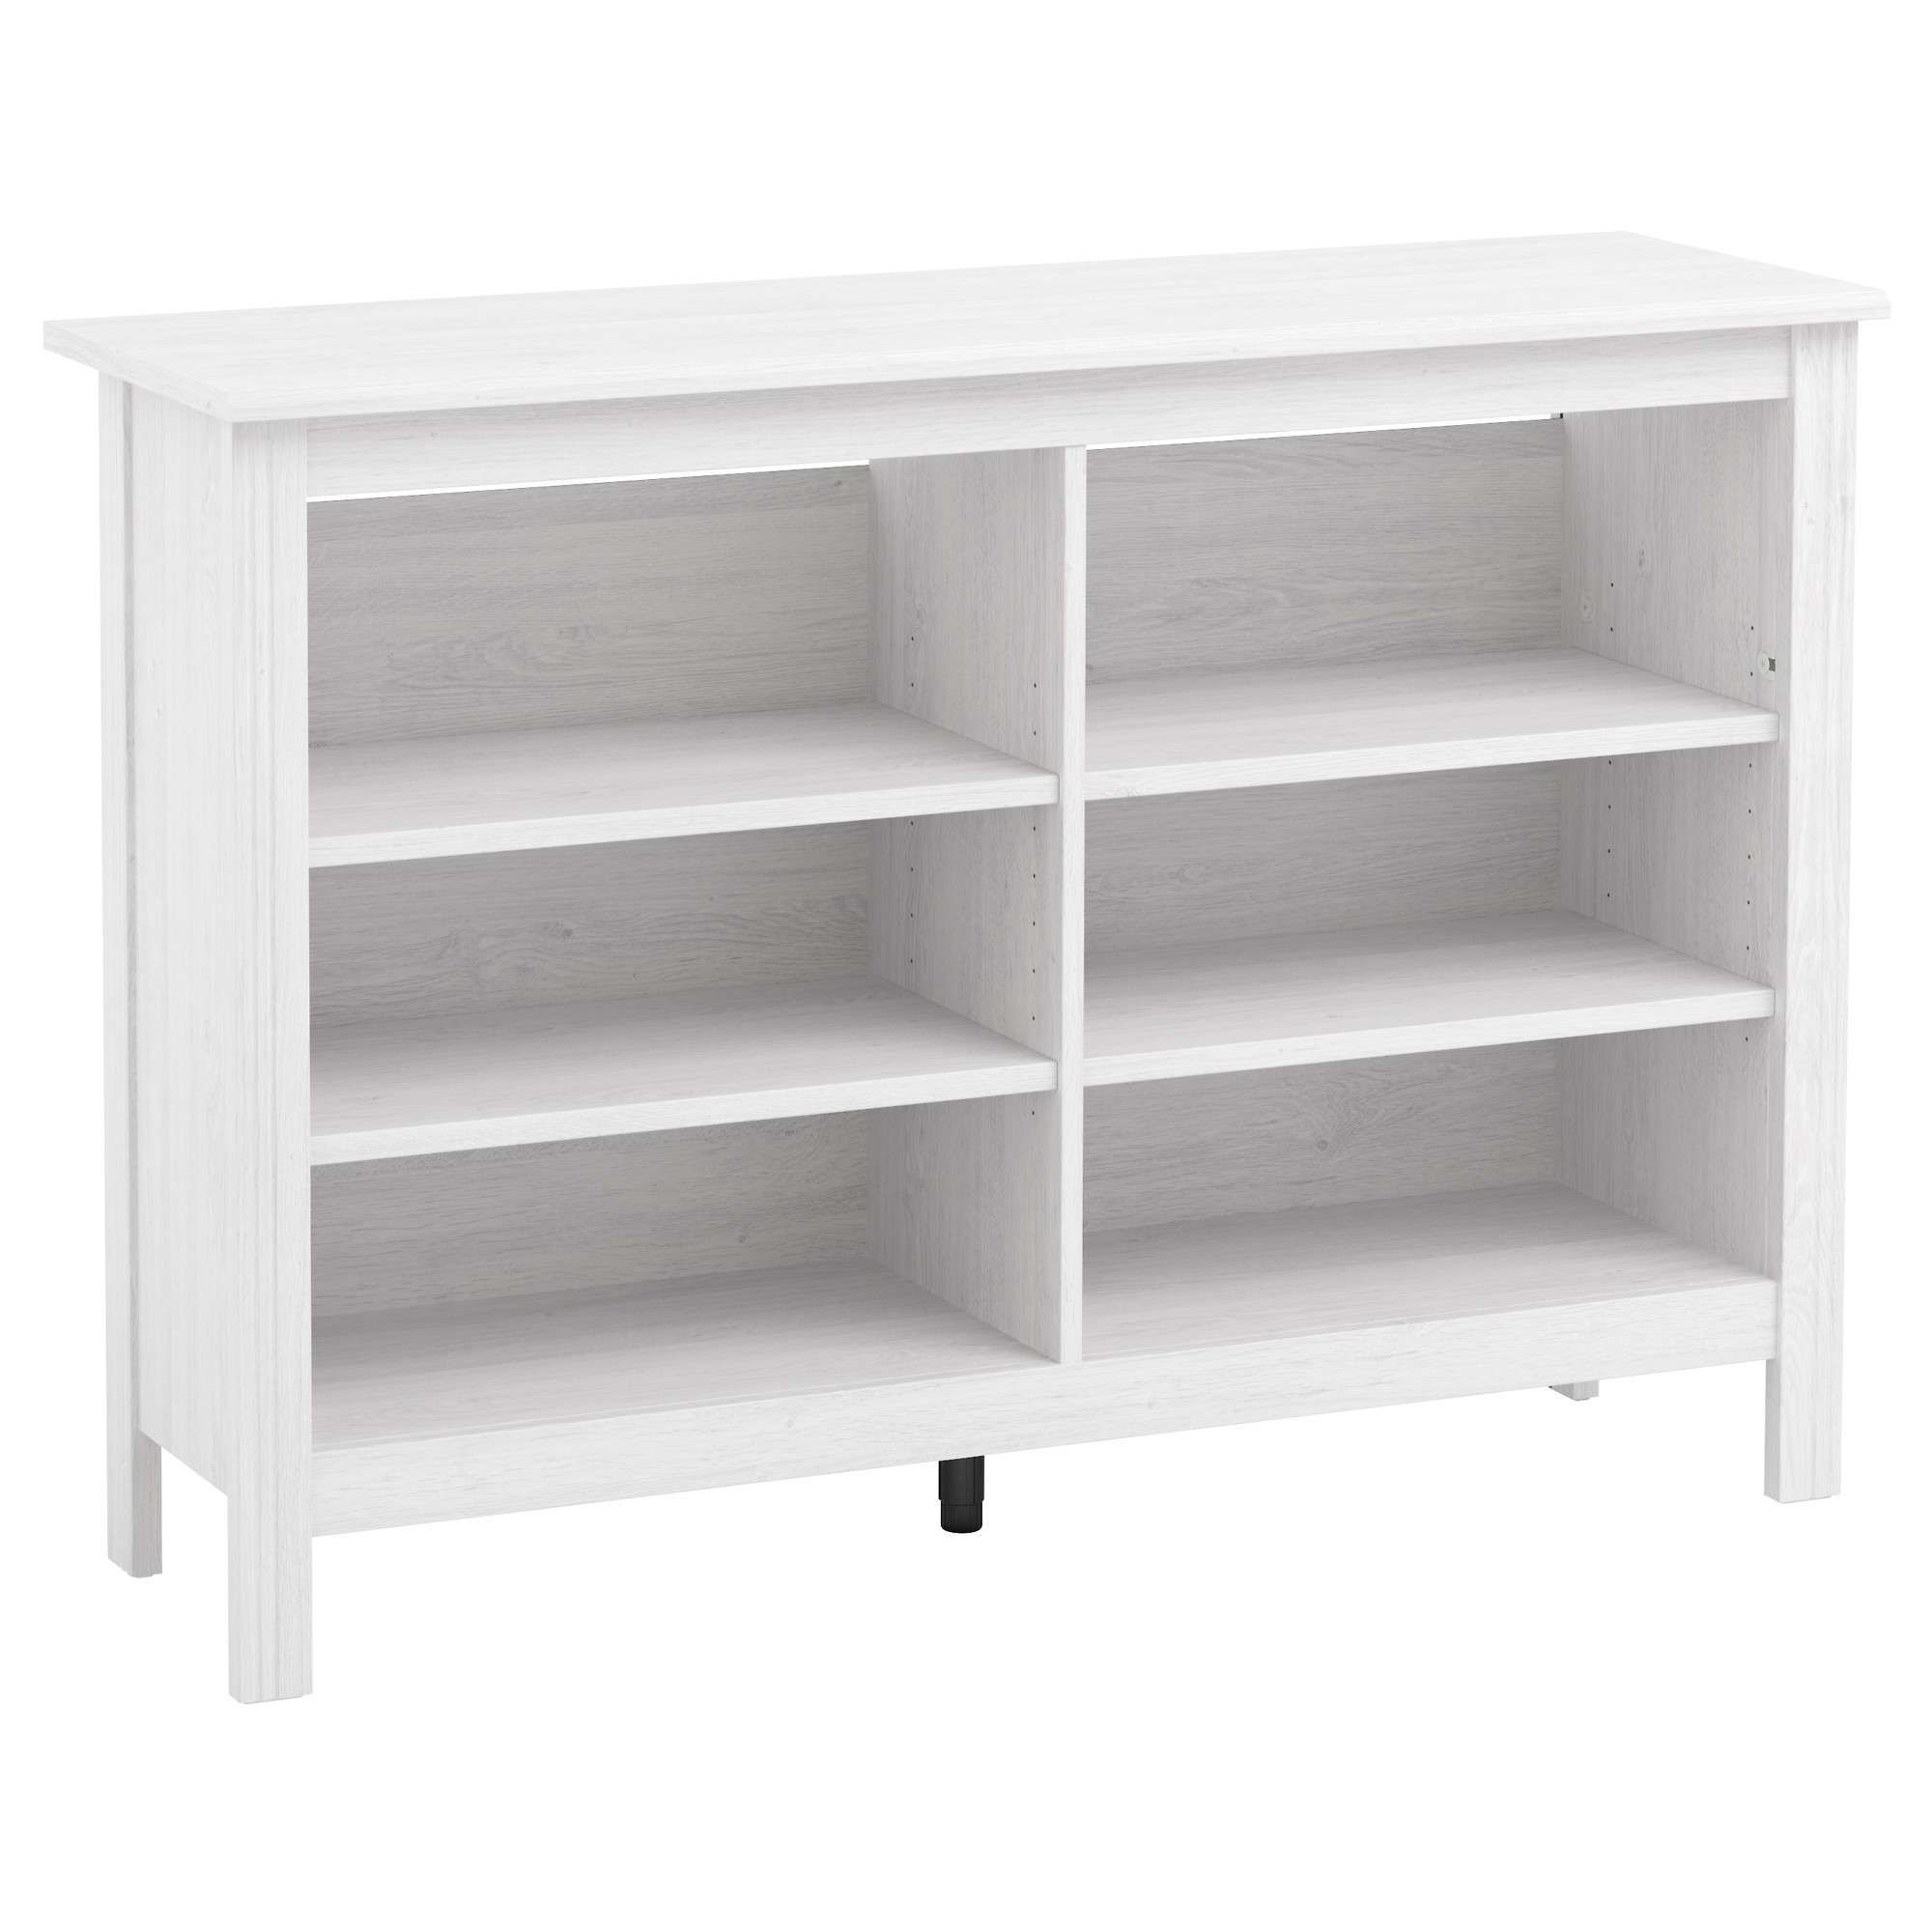 Brusali Tv Bench White 120x85 Cm – Ikea Intended For Small White Tv Cabinets (View 4 of 20)